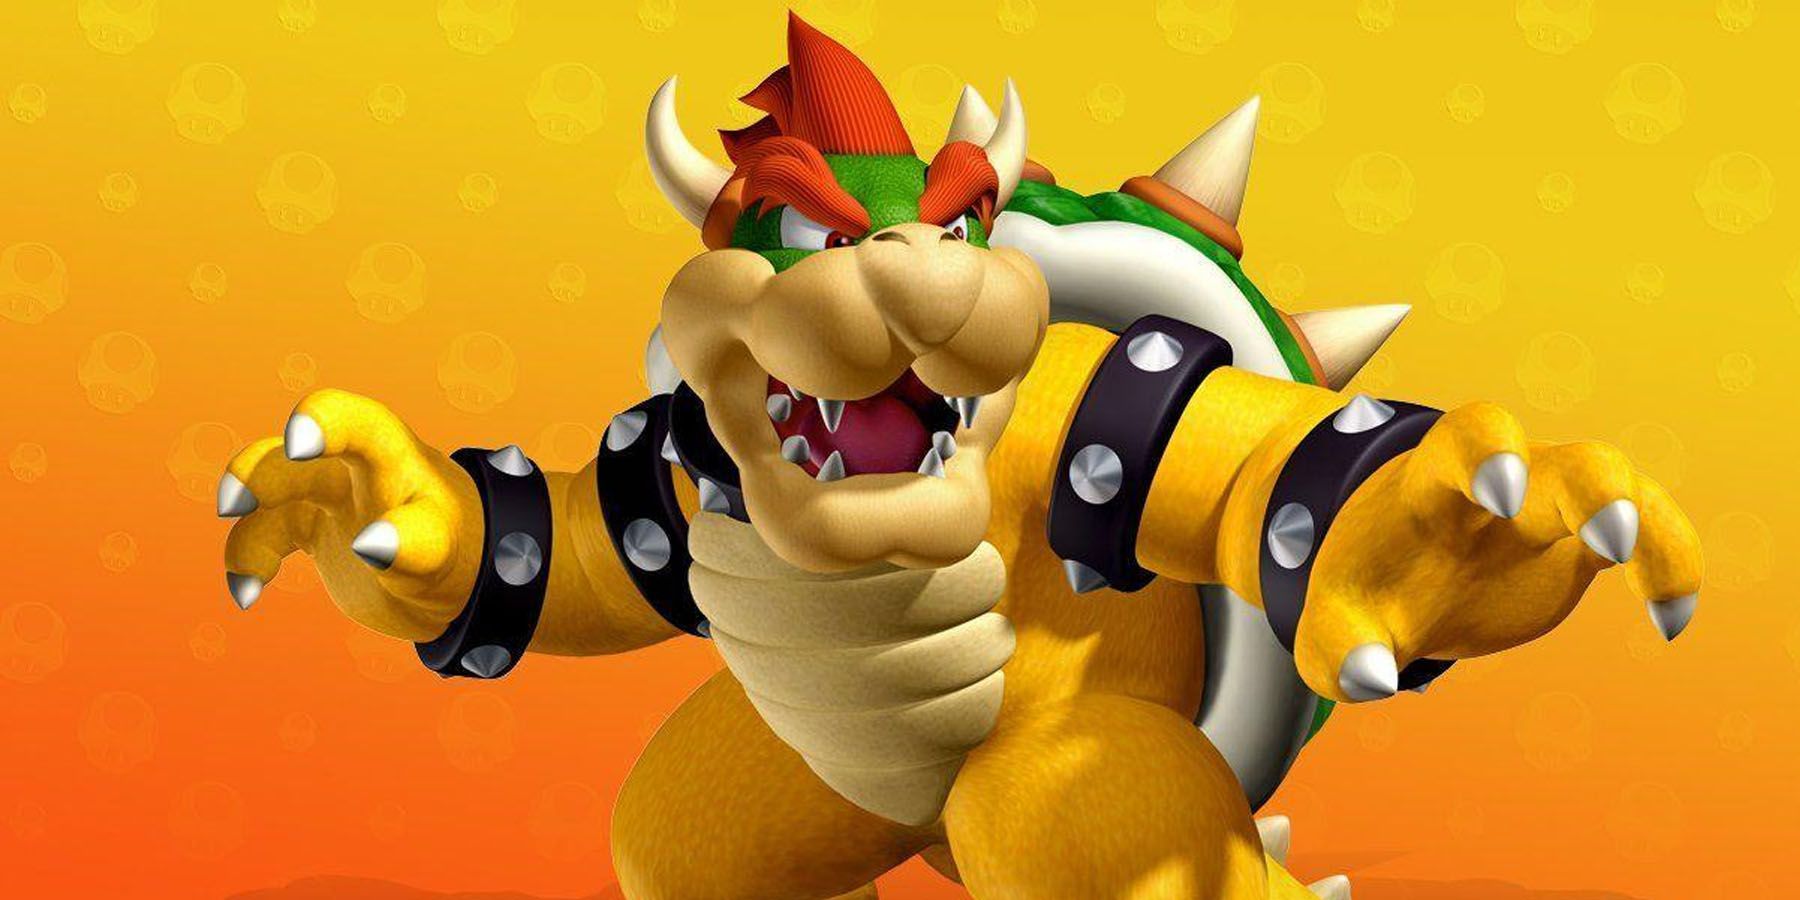 A promotional image of Bowser from Super Mario, posing against a yellow and orange background.